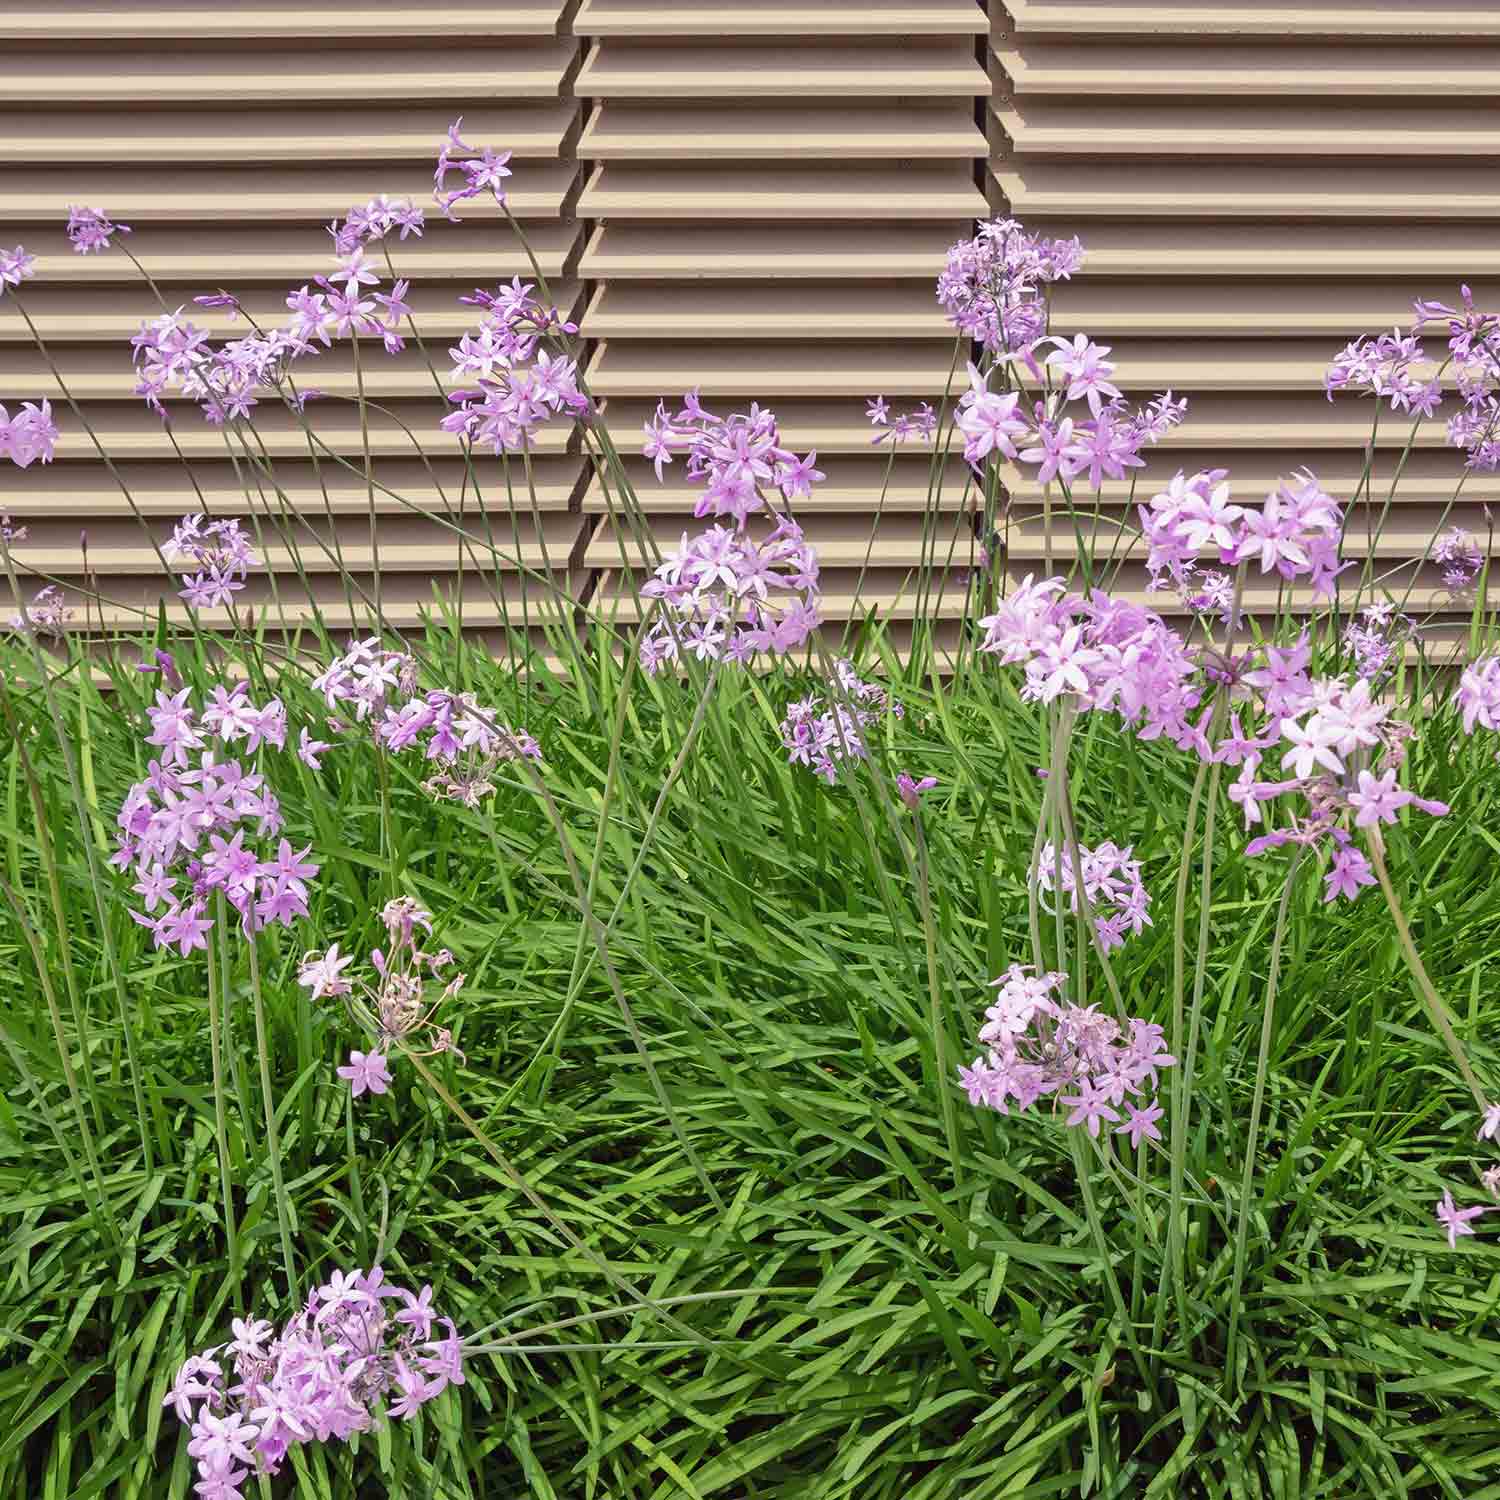 Tulbaghia violacea (Tri-Color Society Garlic) purple flowers and green foliage